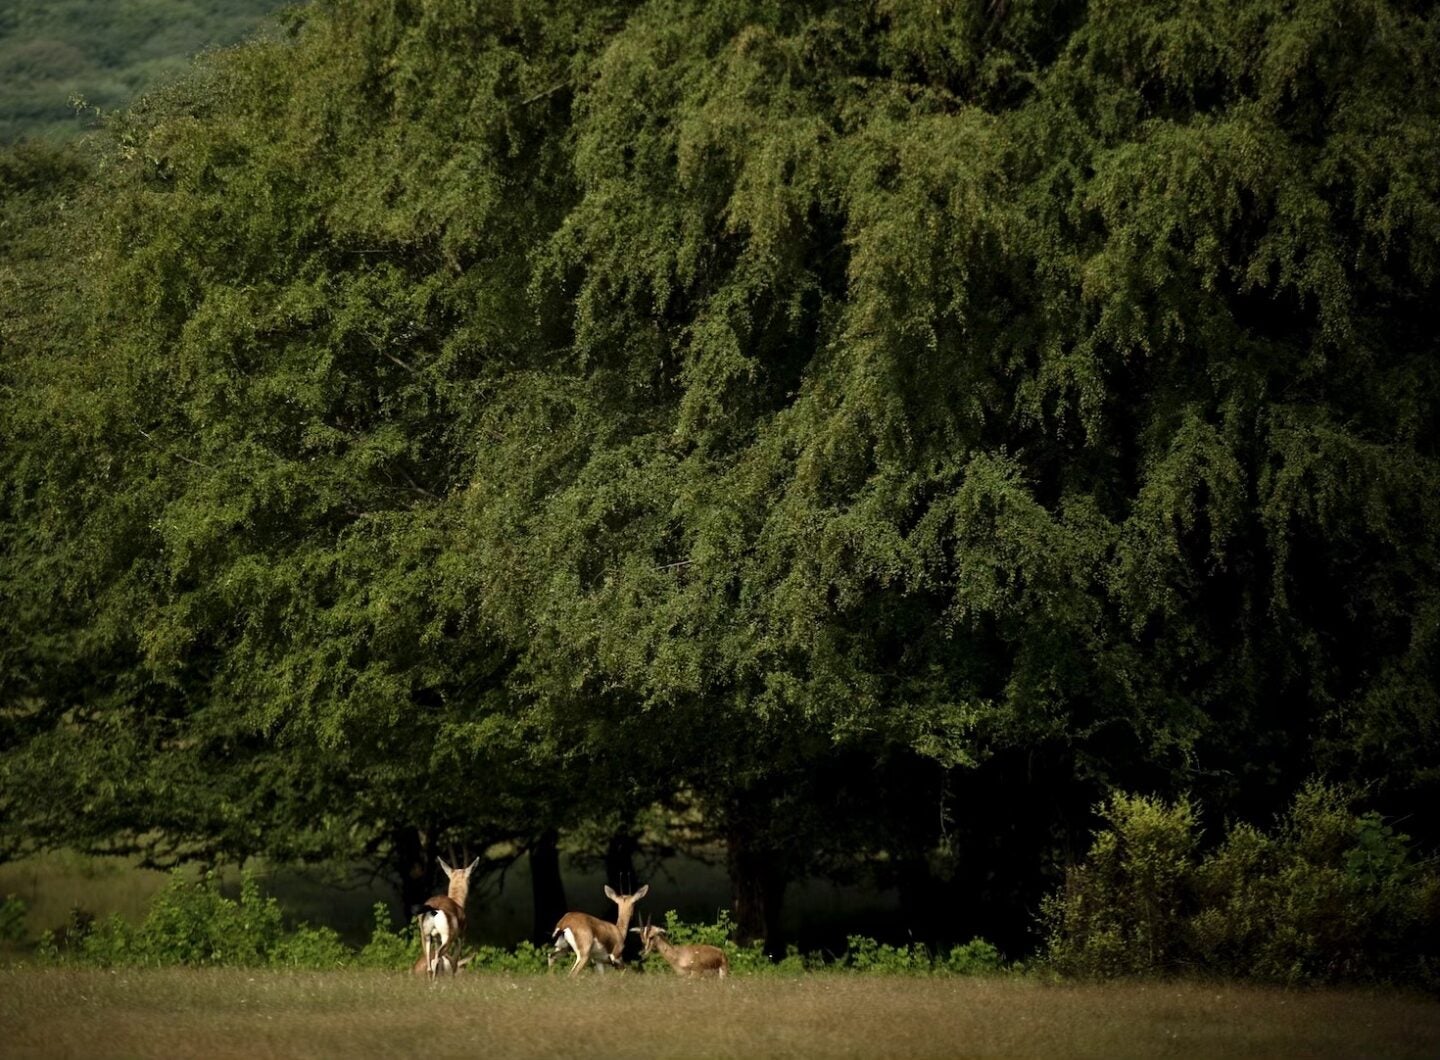 A herd of deer play in the shade of trees in India (Photo Credit Praniket Desai)